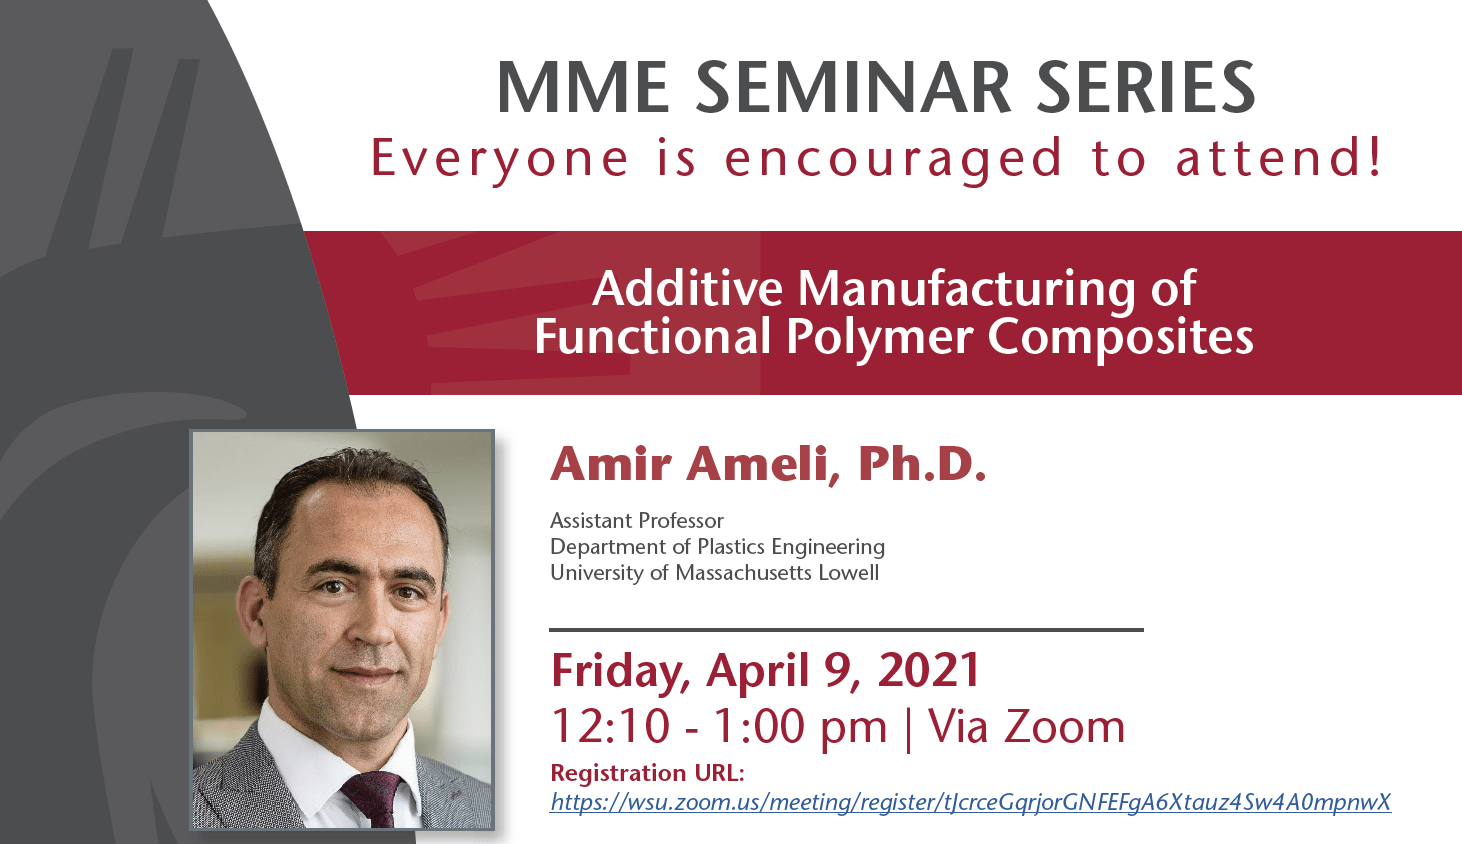 Amir Ameli speaking on Additive Manufacturing of Functional Polymer Composites